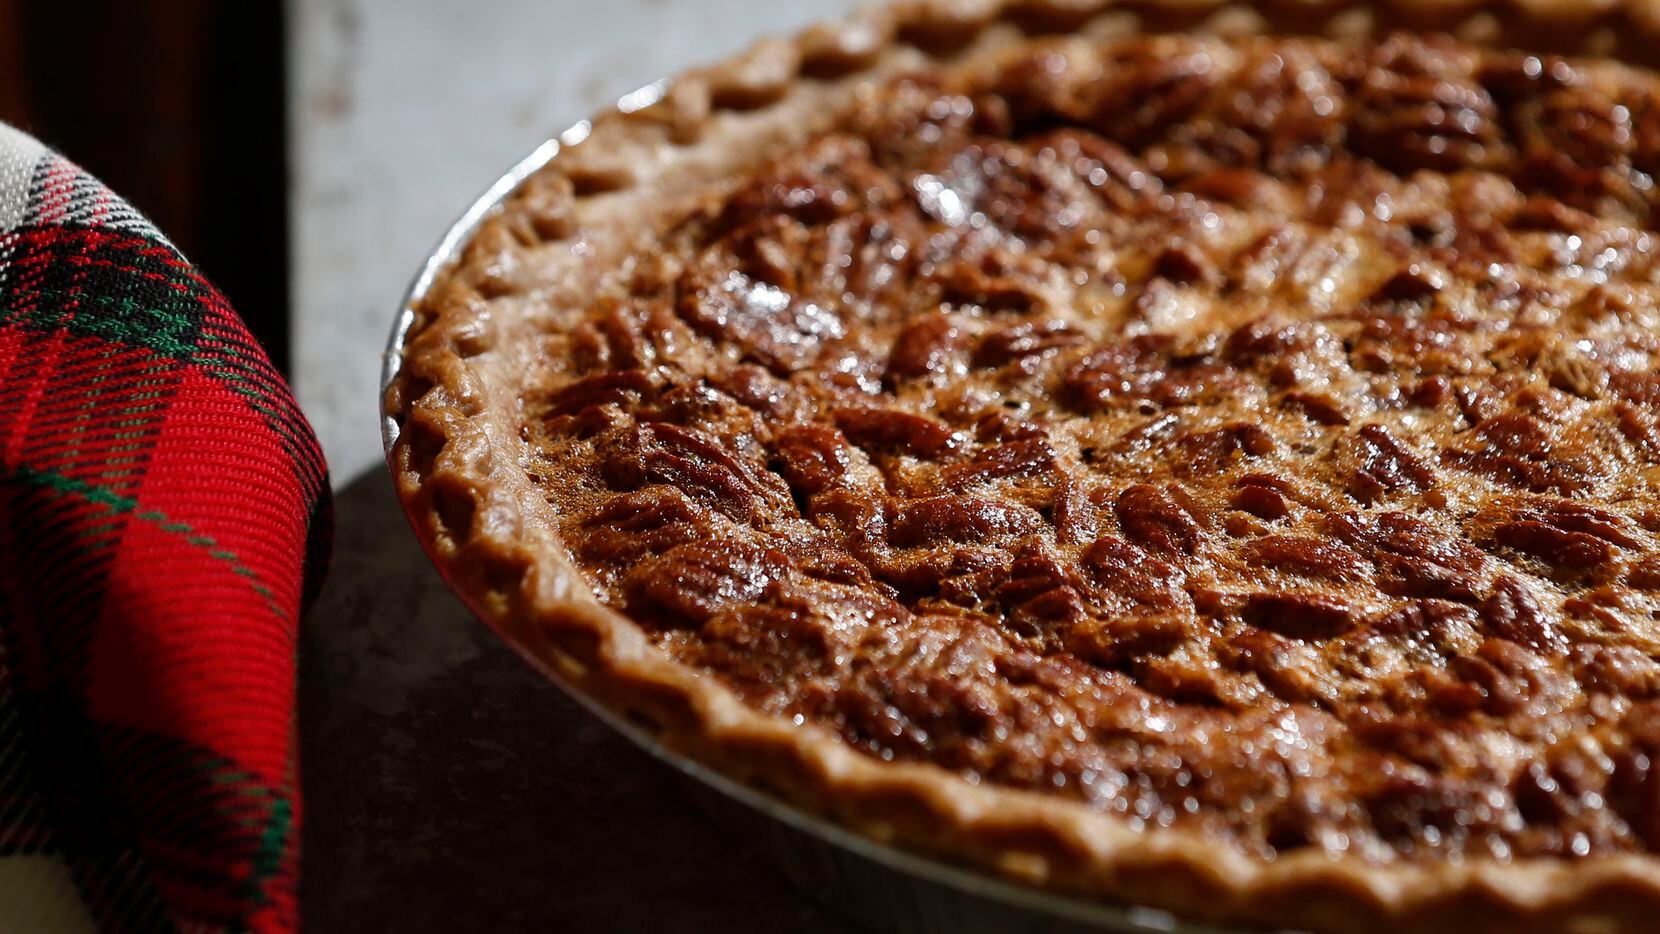 Pecan pie made with Texas pecans is a holiday tradition.